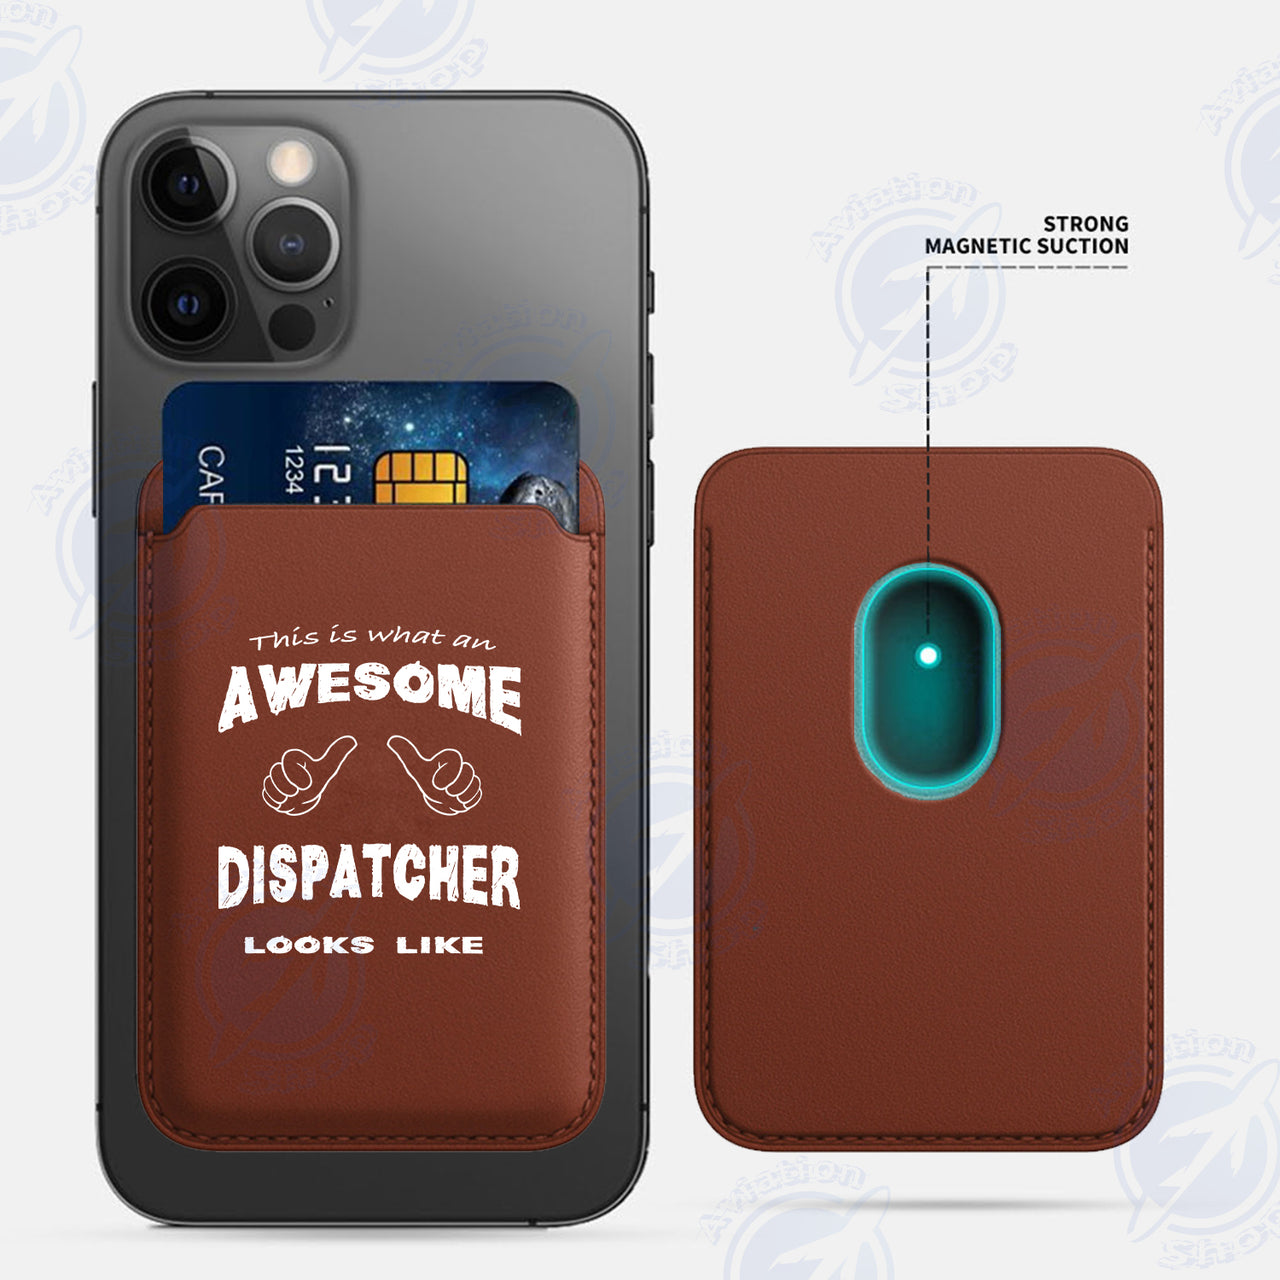 Dispatcher iPhone Cases Magnetic Card Wallet